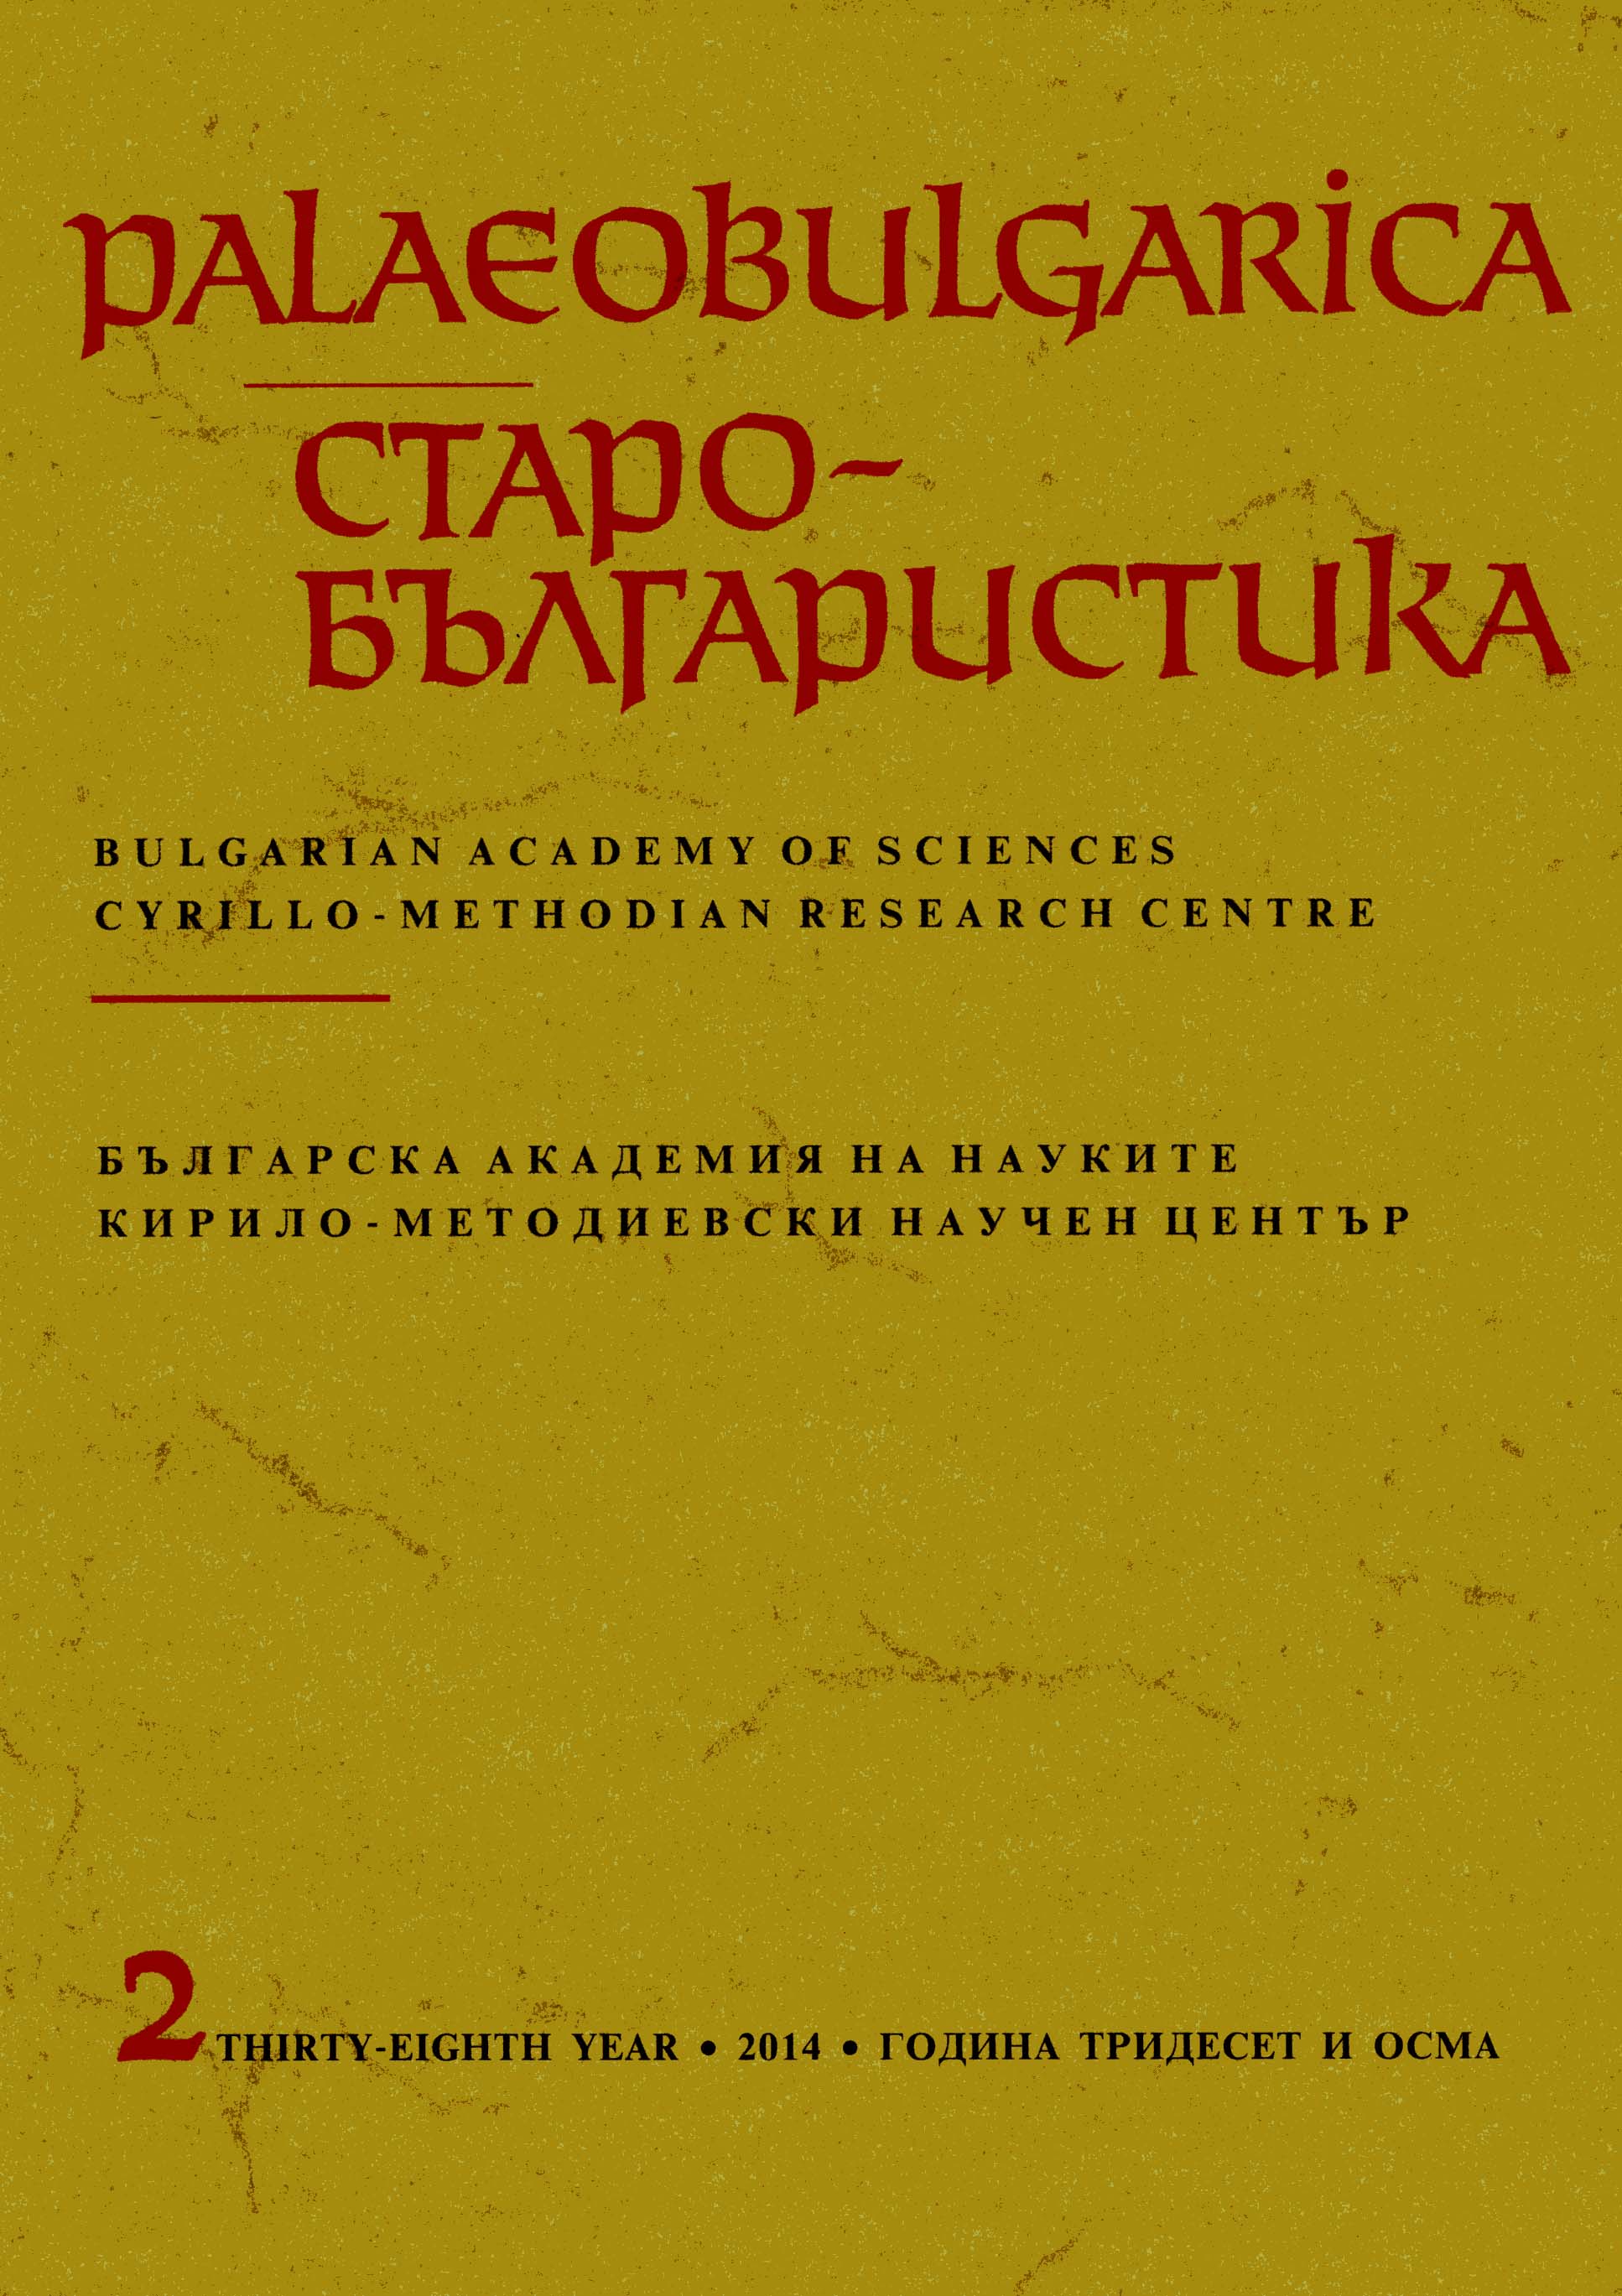 New Text-Critical and Source Study for the “Zlatostruy” Collection Cover Image